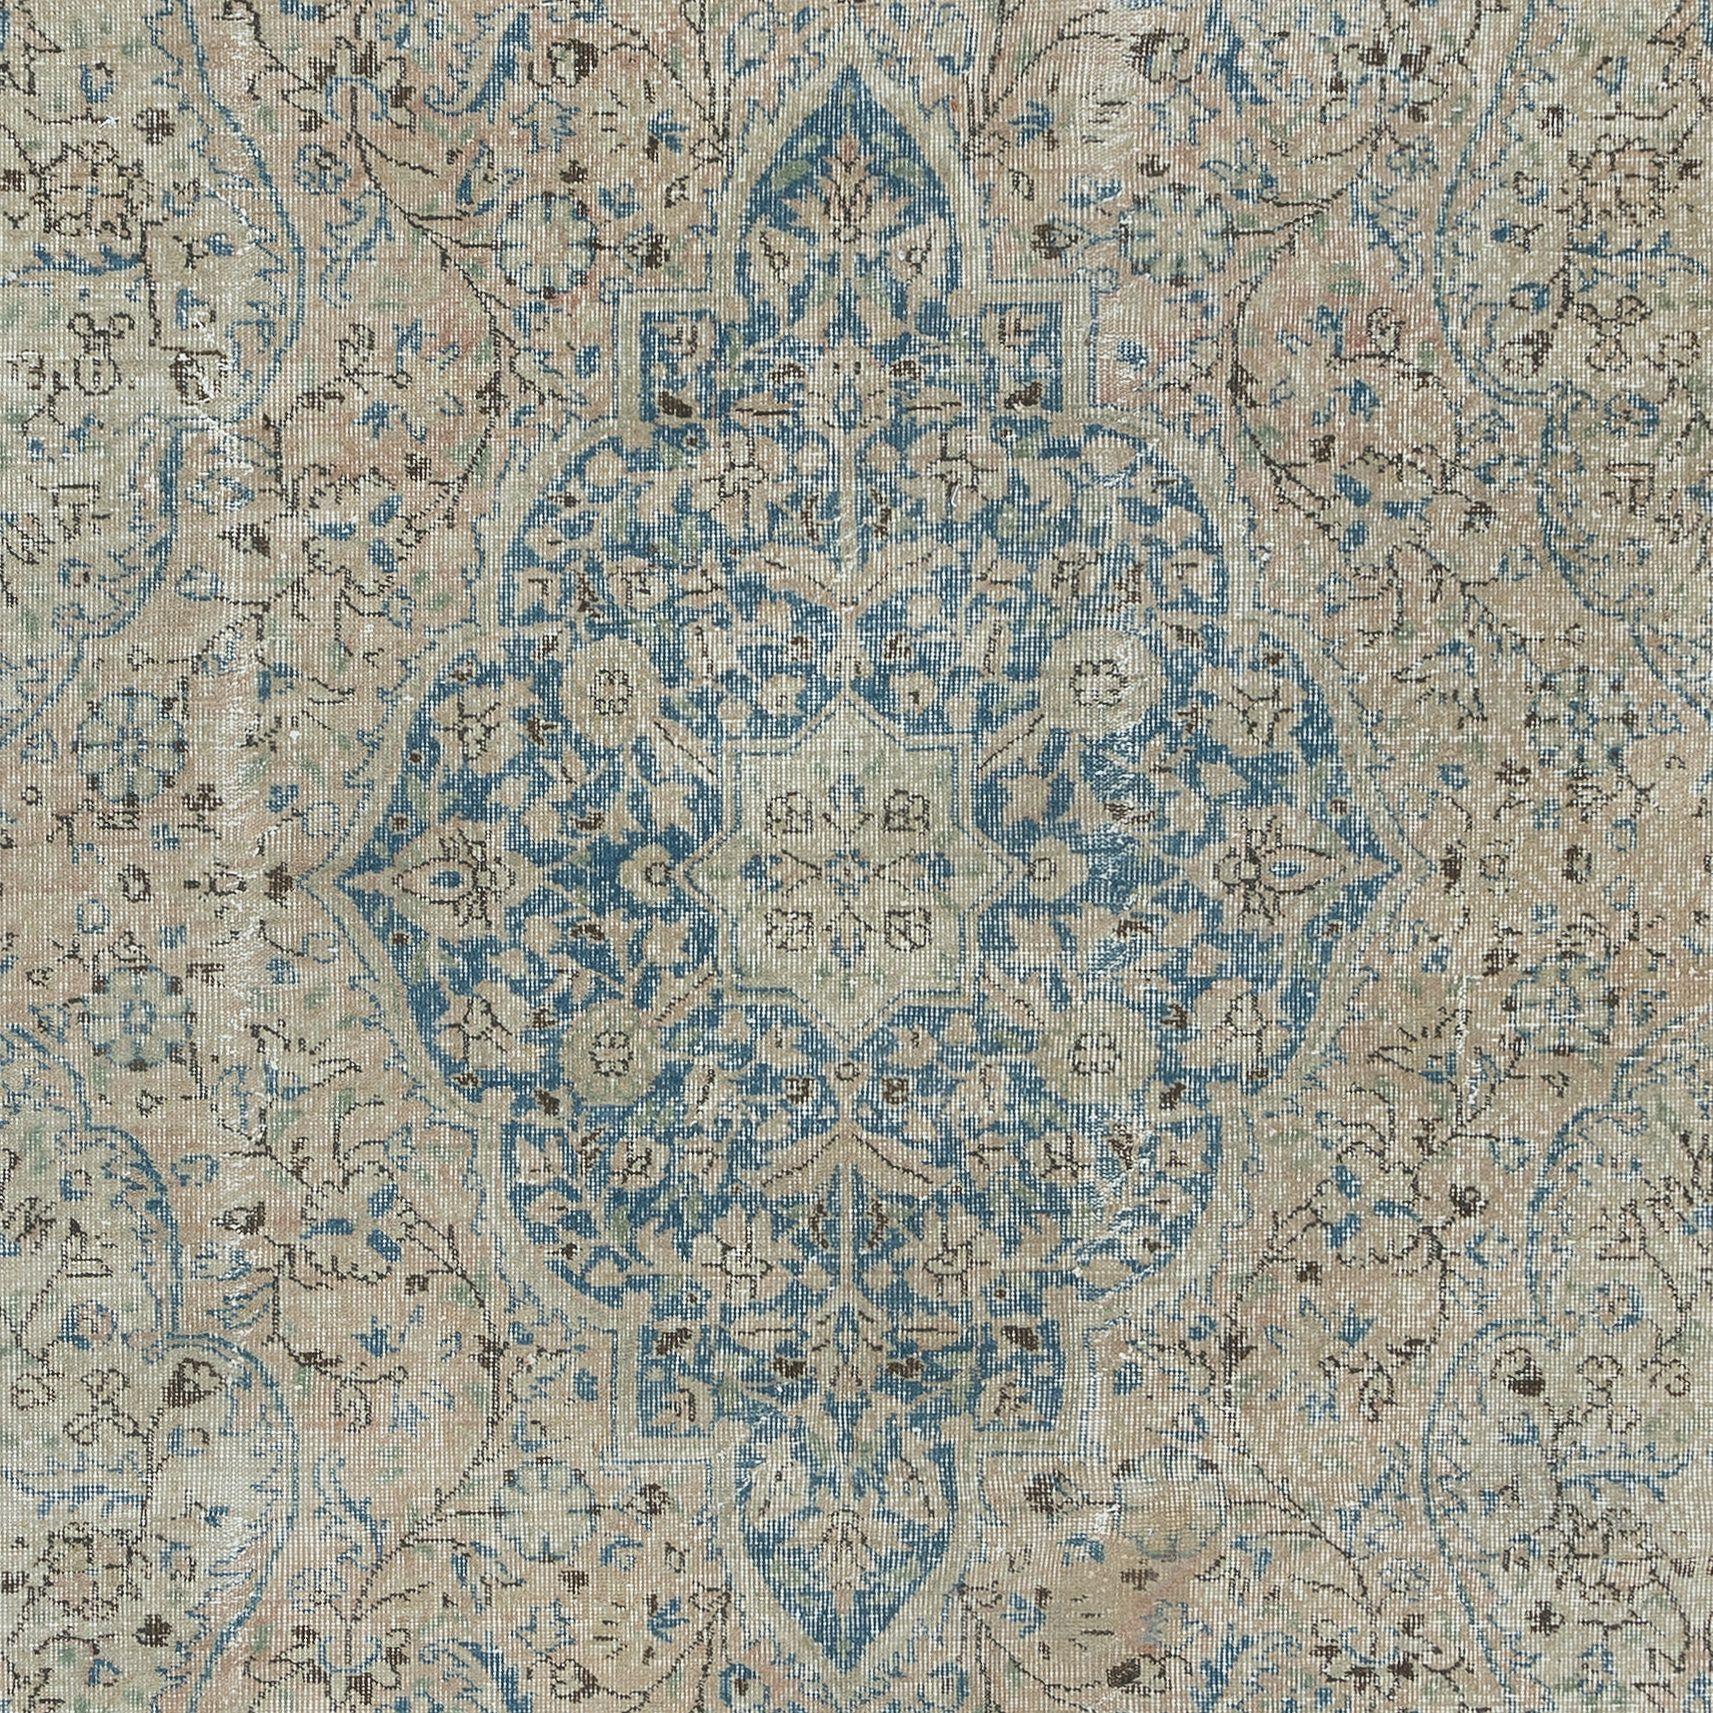 Hand-Knotted 7x10.5 Ft Unique Anatolian Rug, Ca 1950, Handmade Wool Carpet in Muted Colors For Sale